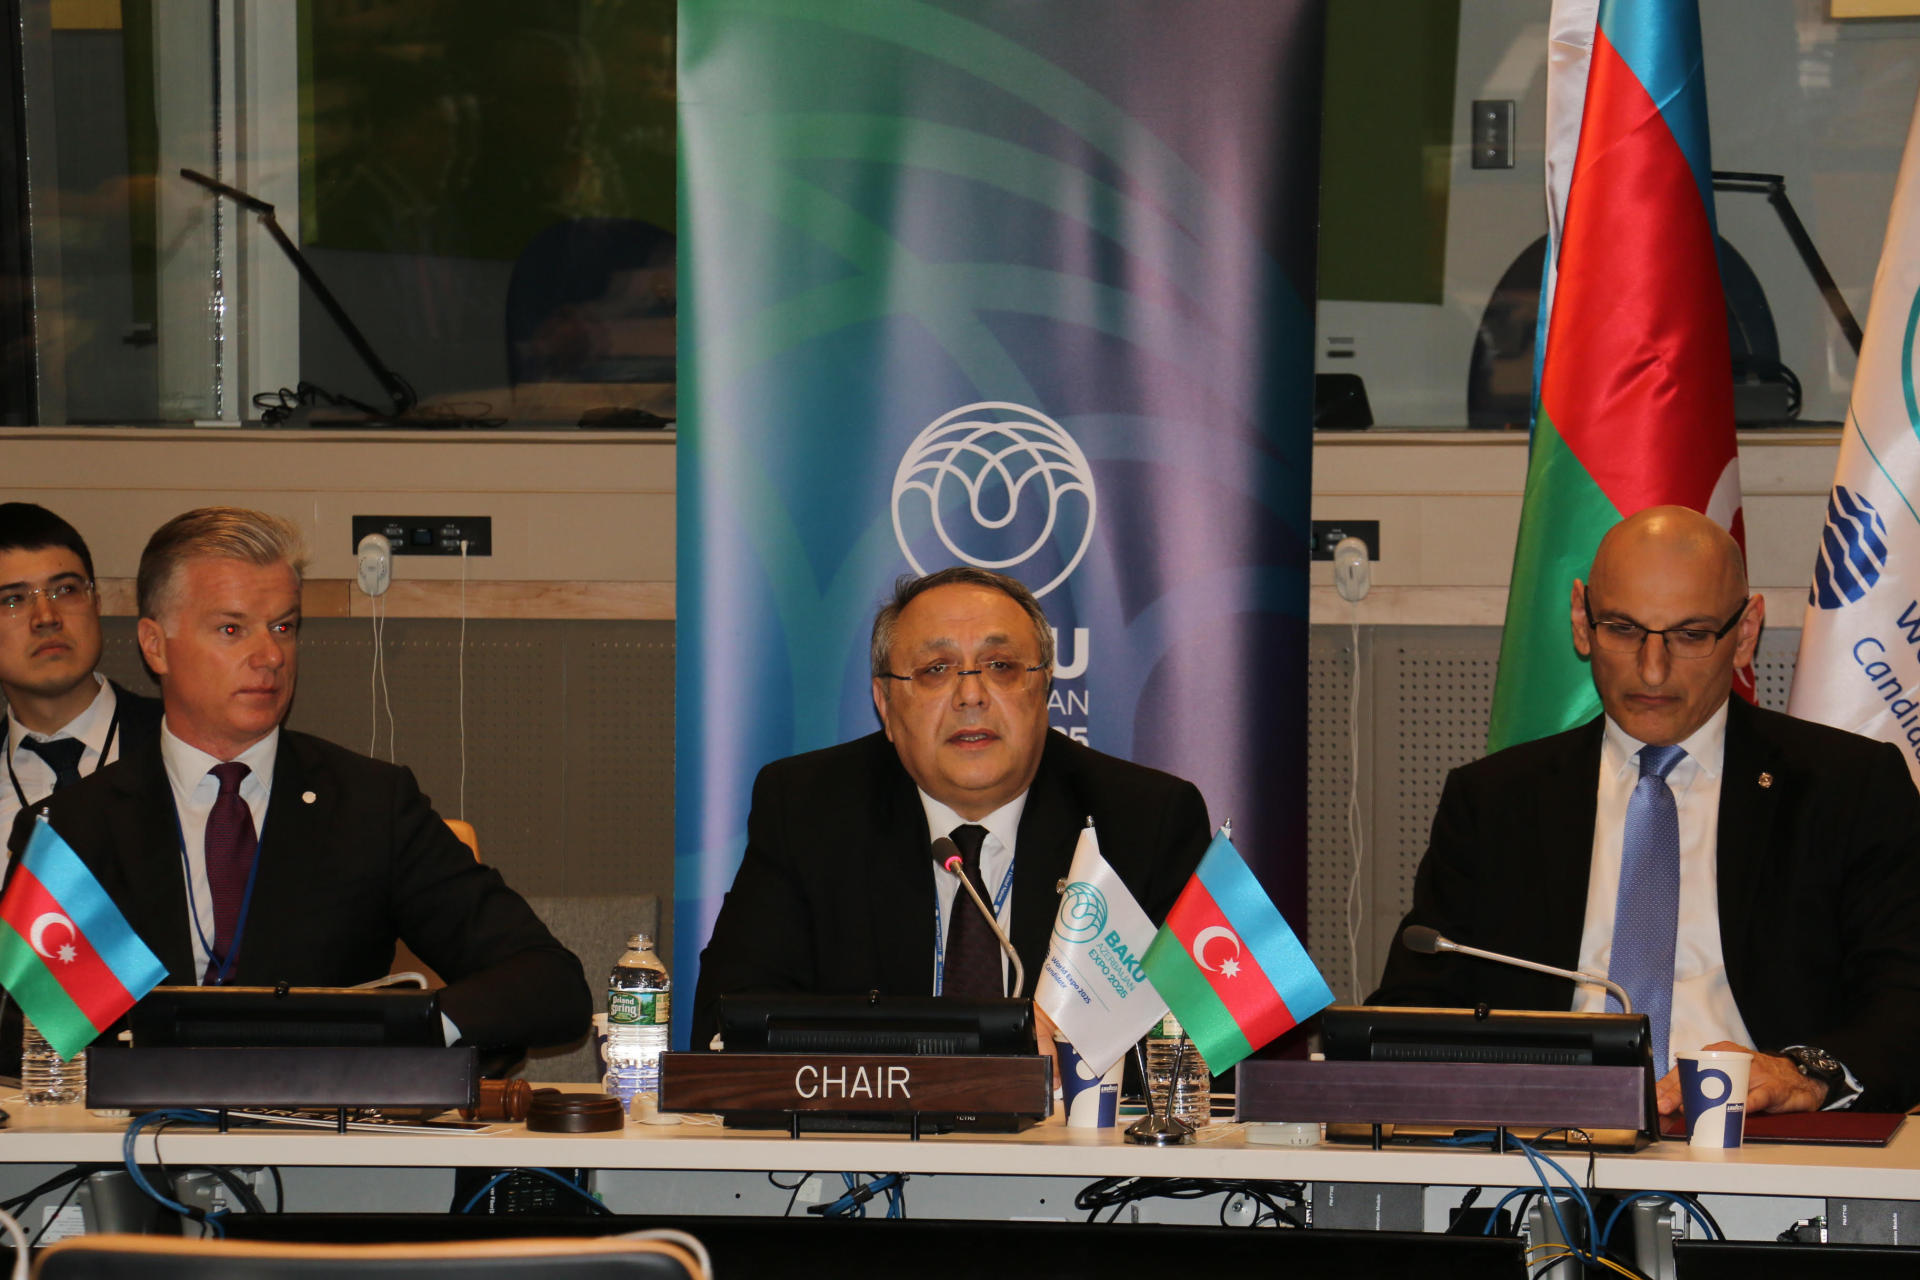 Elchin Amirbayov: Baku can become a new destination for world exhibitions EXPO, inspire other countries (PHOTO)